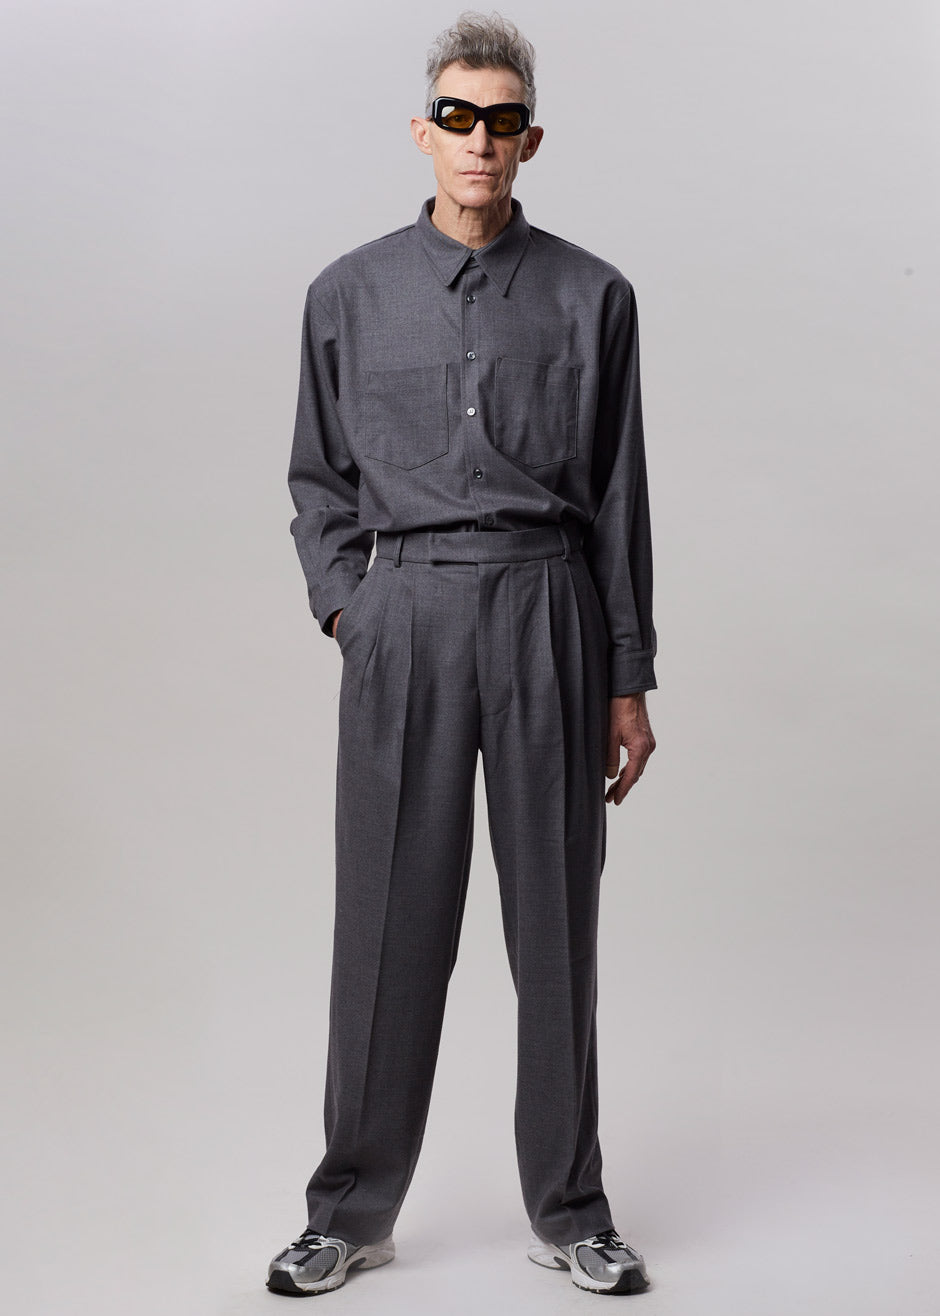 Heith Flanelle Suit Pants - Charcoal - 1